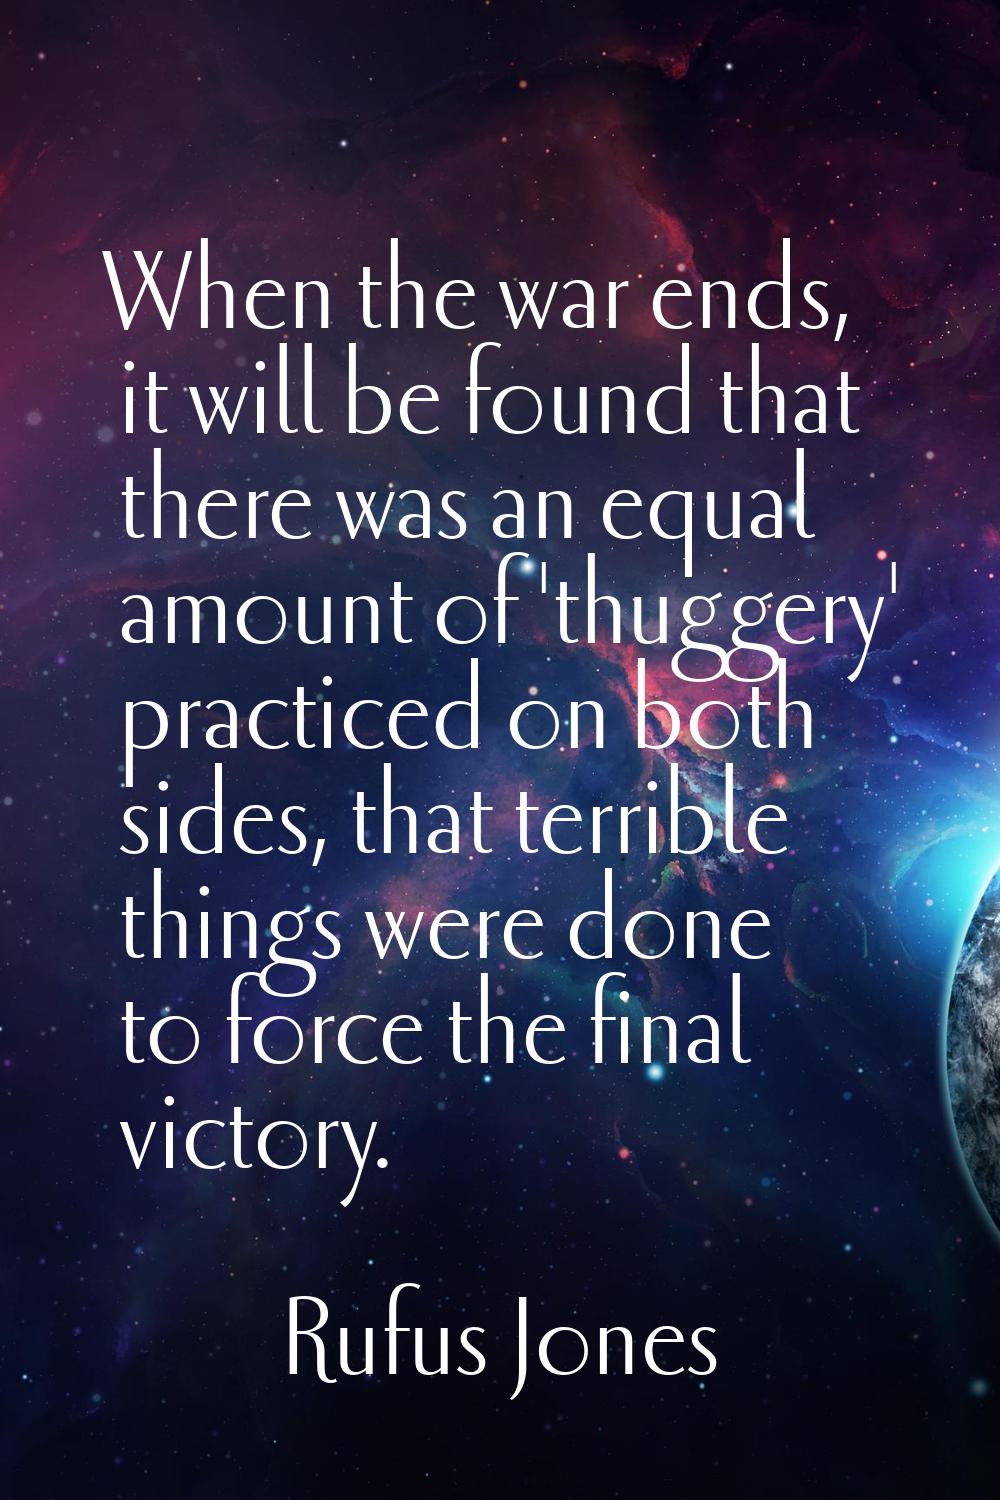 When the war ends, it will be found that there was an equal amount of 'thuggery' practiced on both 